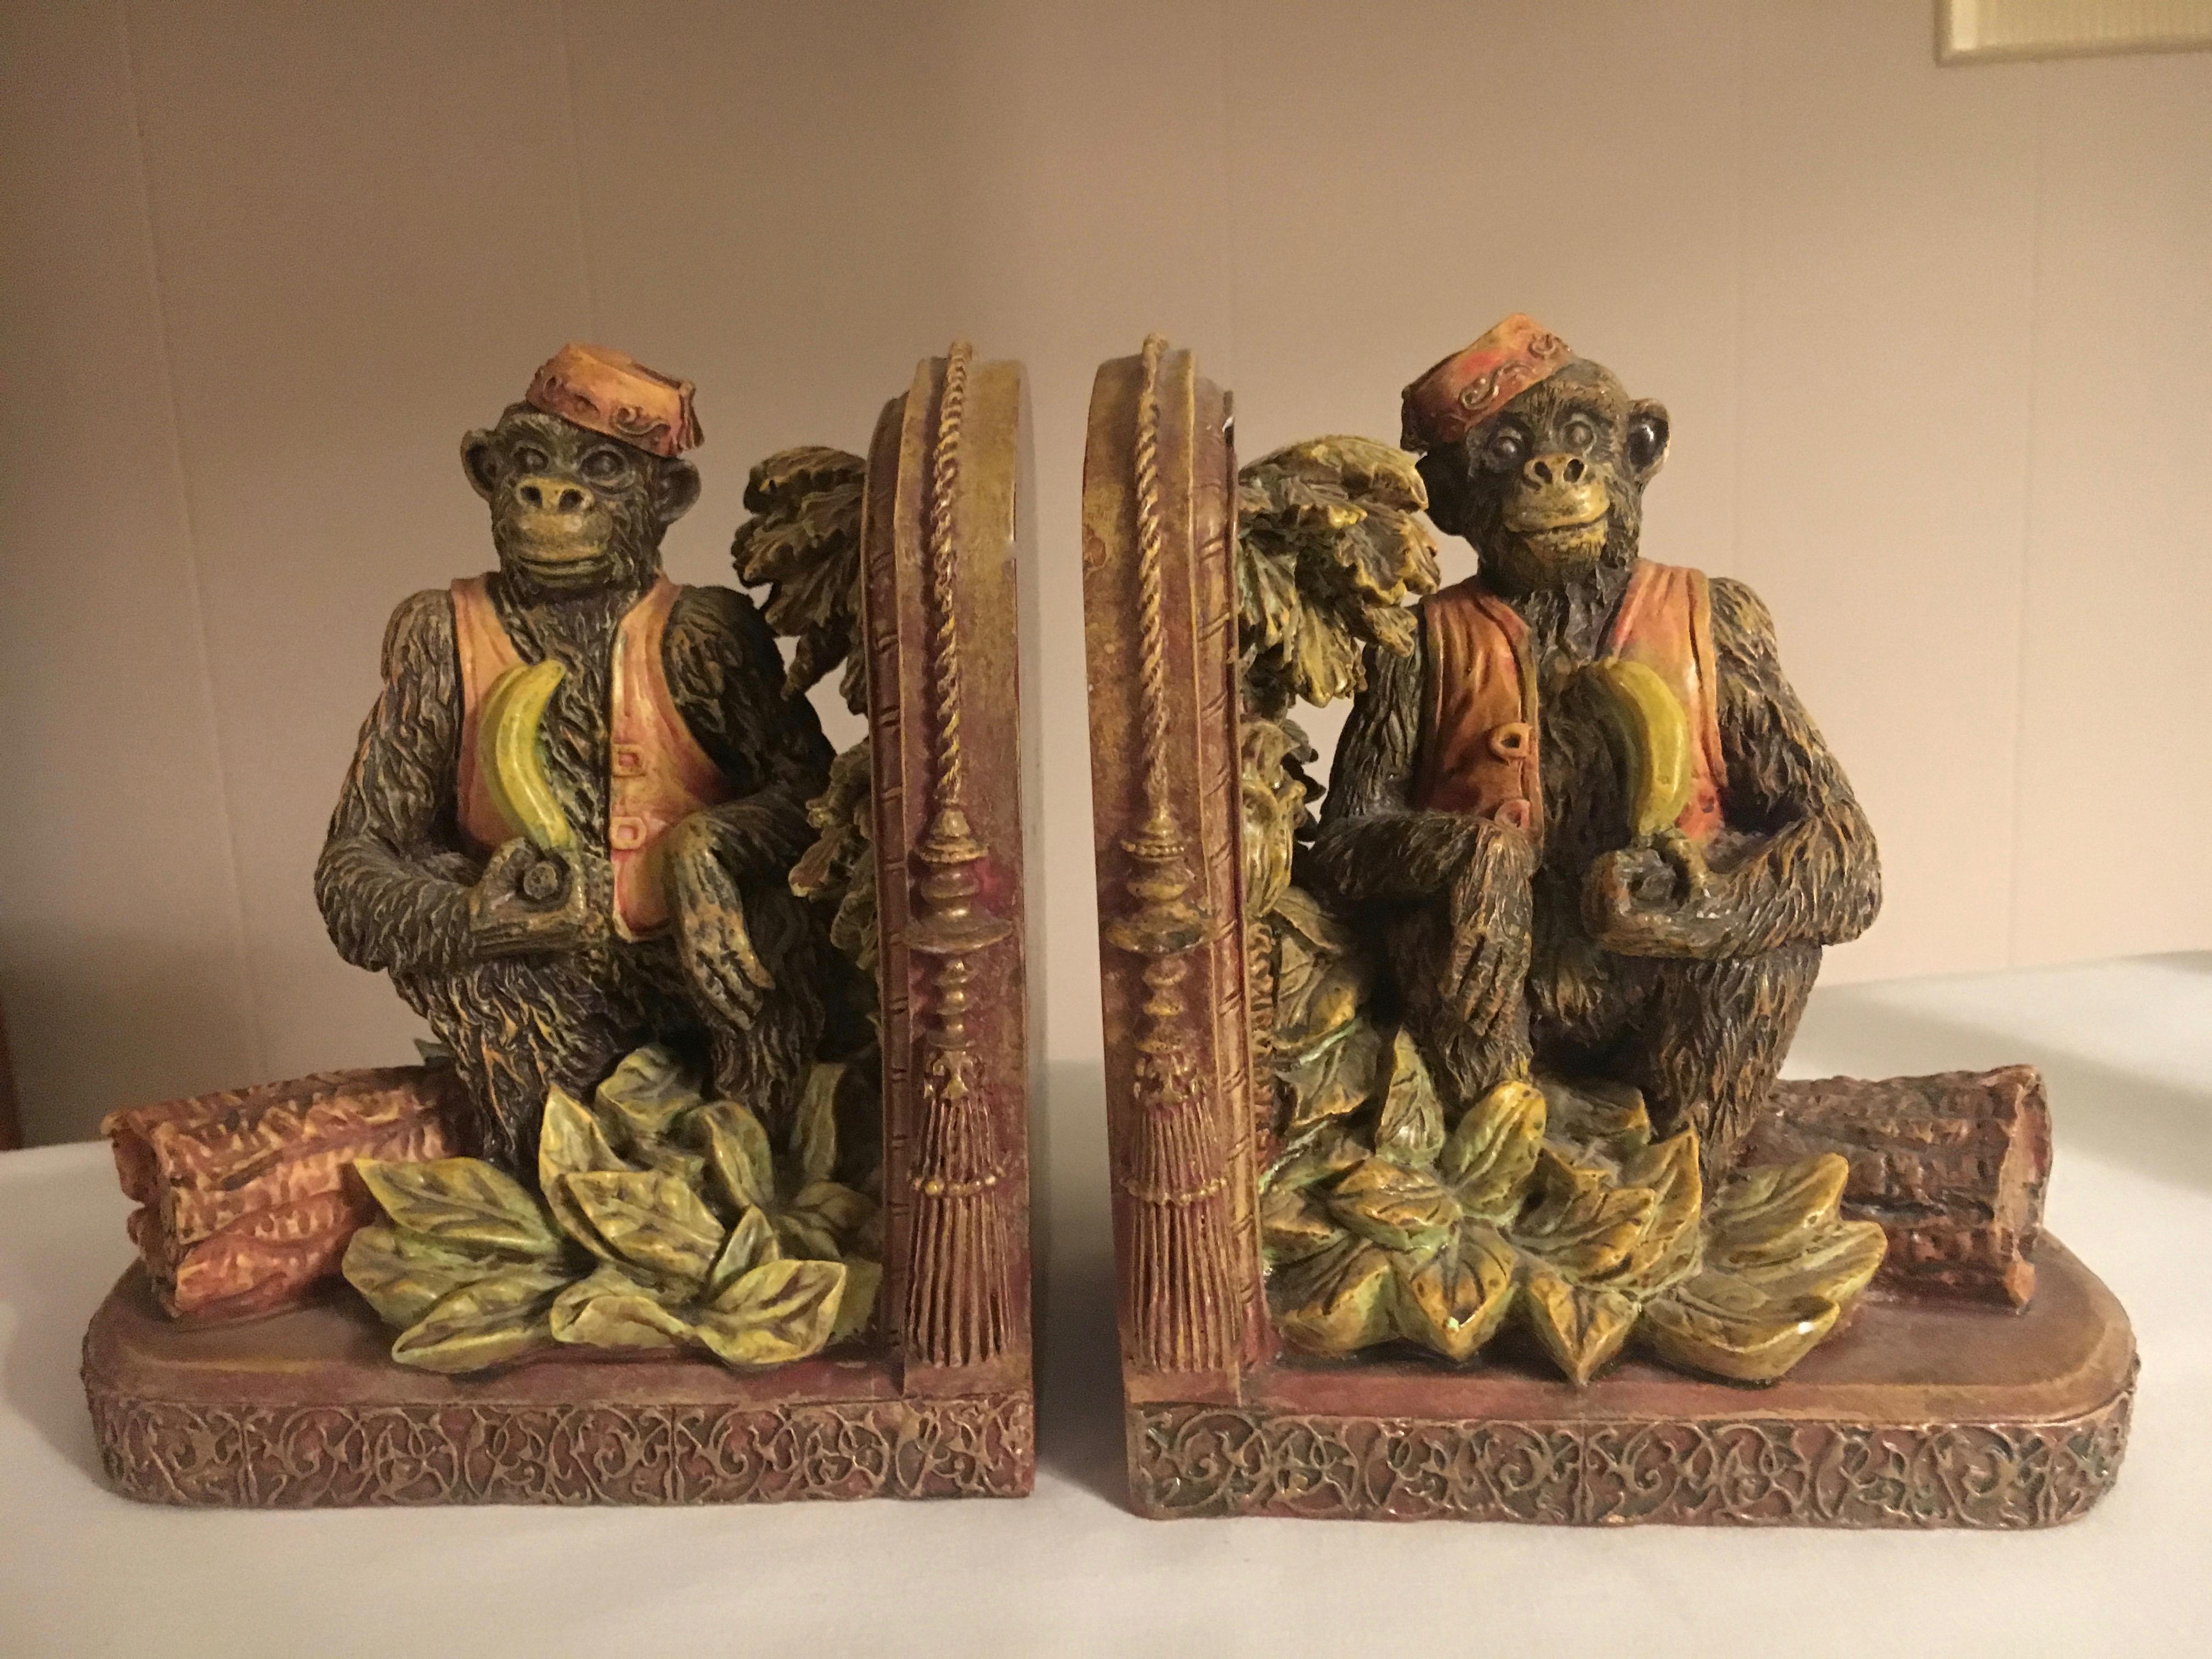 Pair of bookends with monkeys, a handsome pair of monkey's, whimsical and colorful. Perfect for any room or shelf, especially the Childs room. Material is resilient composition.